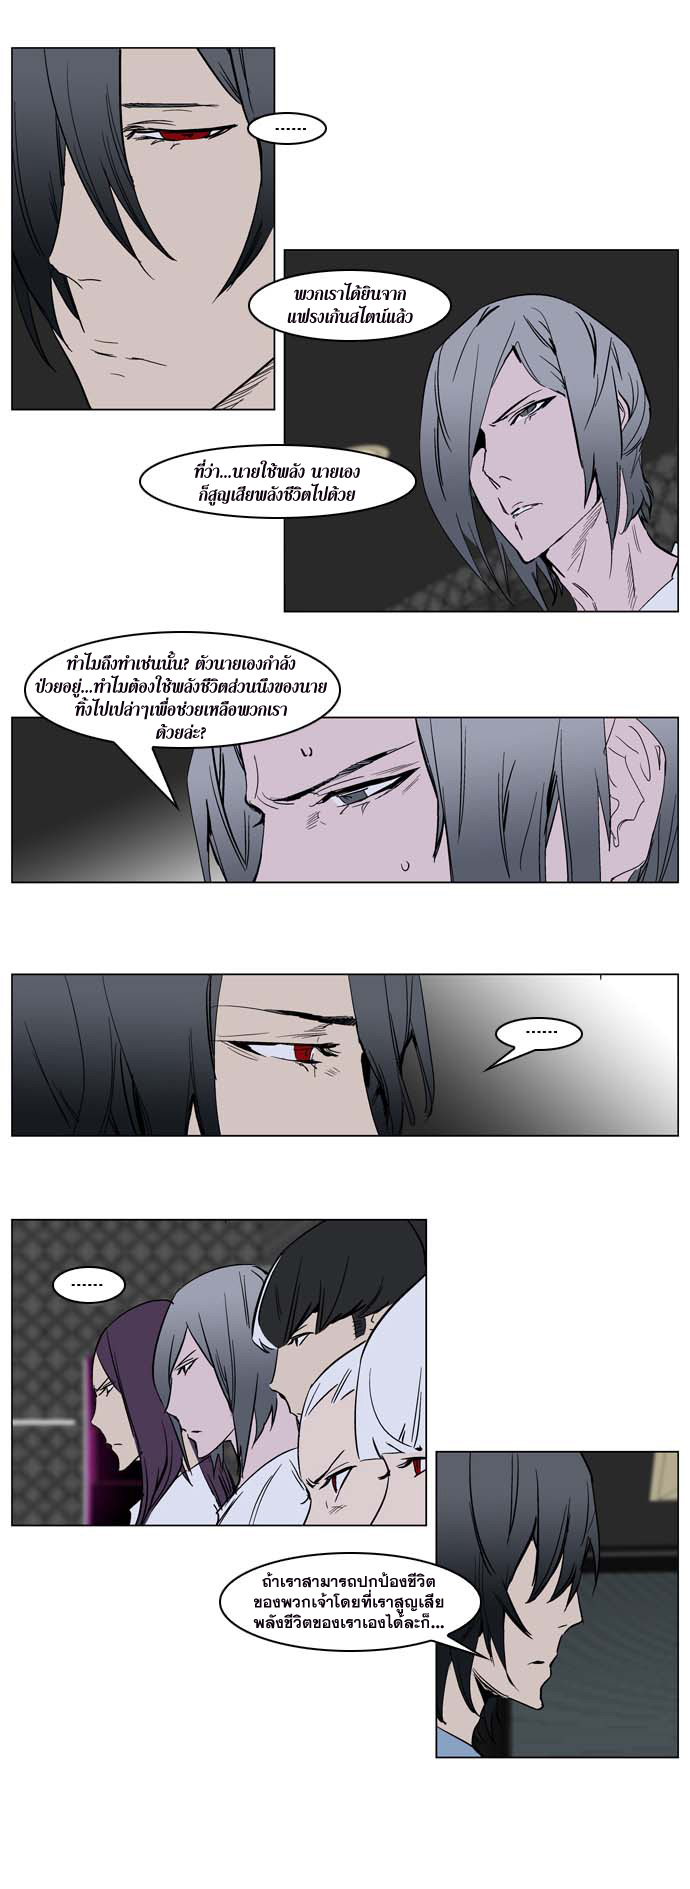 Noblesse 237 013